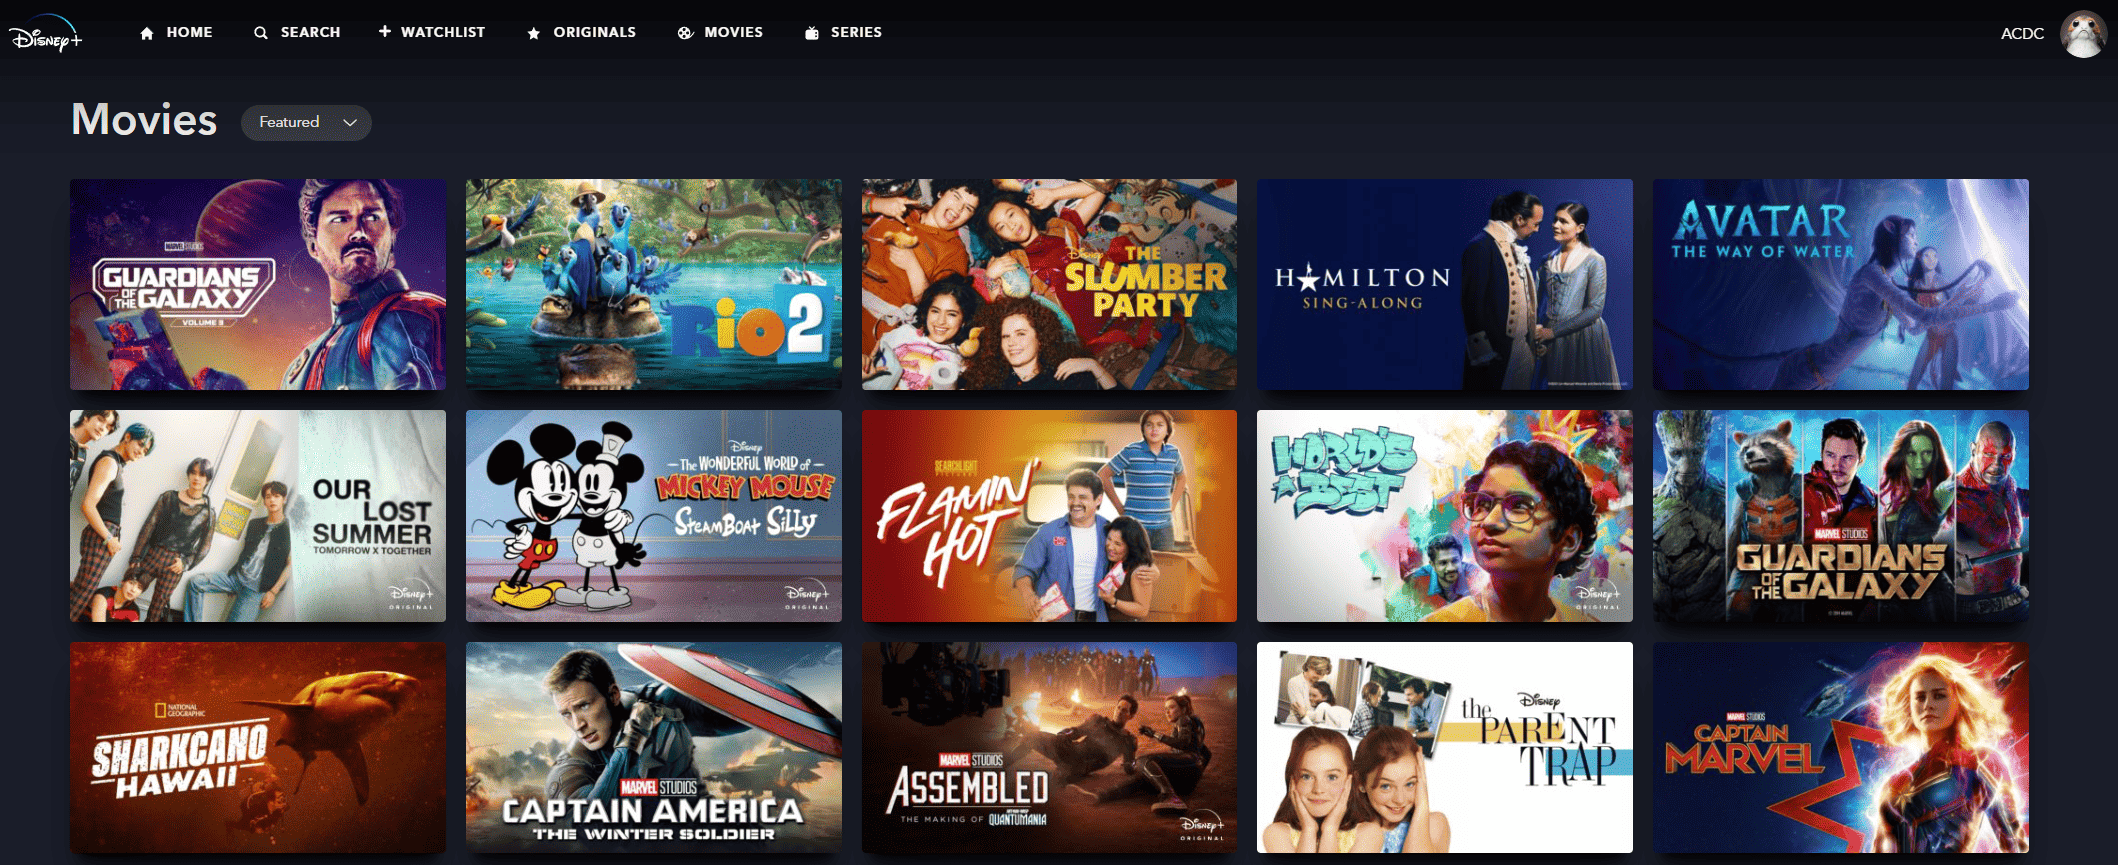 Screenshot of various movies featured under the Movies tab on Disney+.